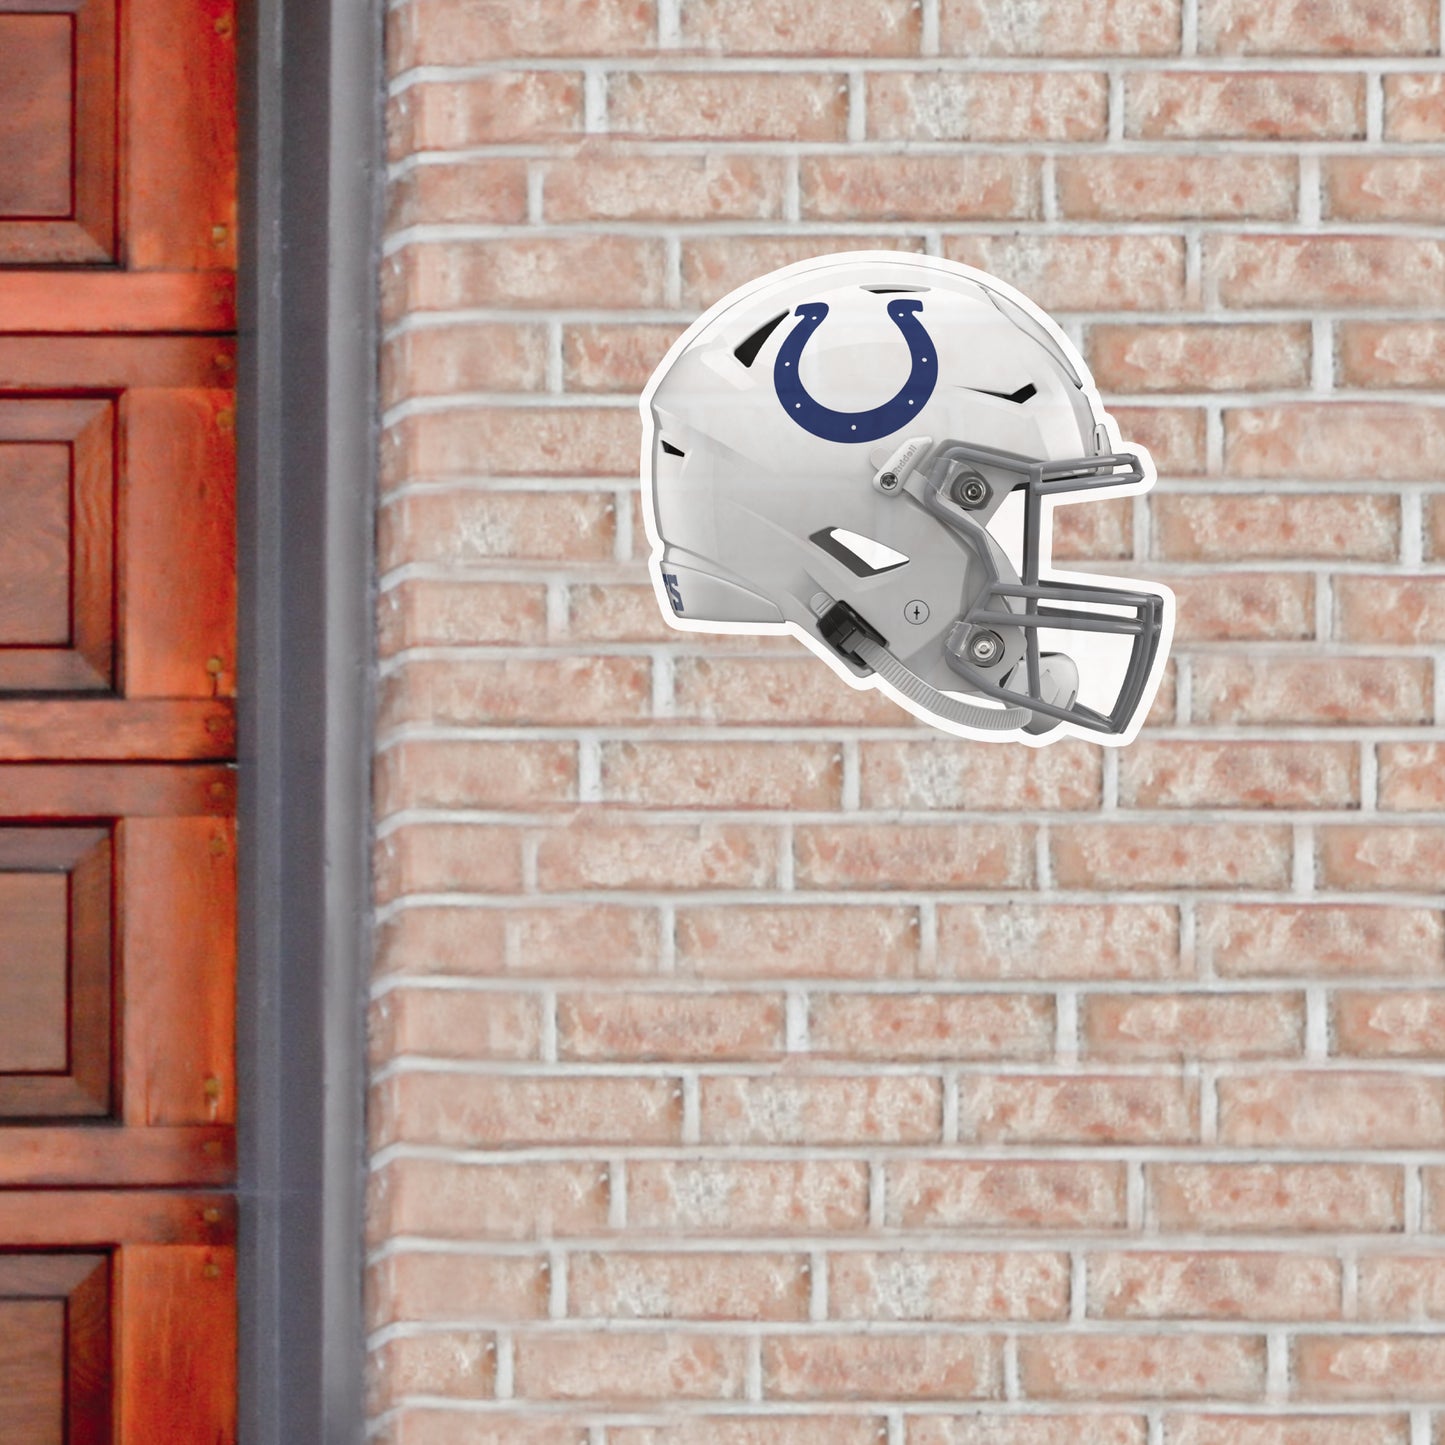 Indianapolis Colts: Outdoor Helmet - Officially Licensed NFL Outdoor Graphic